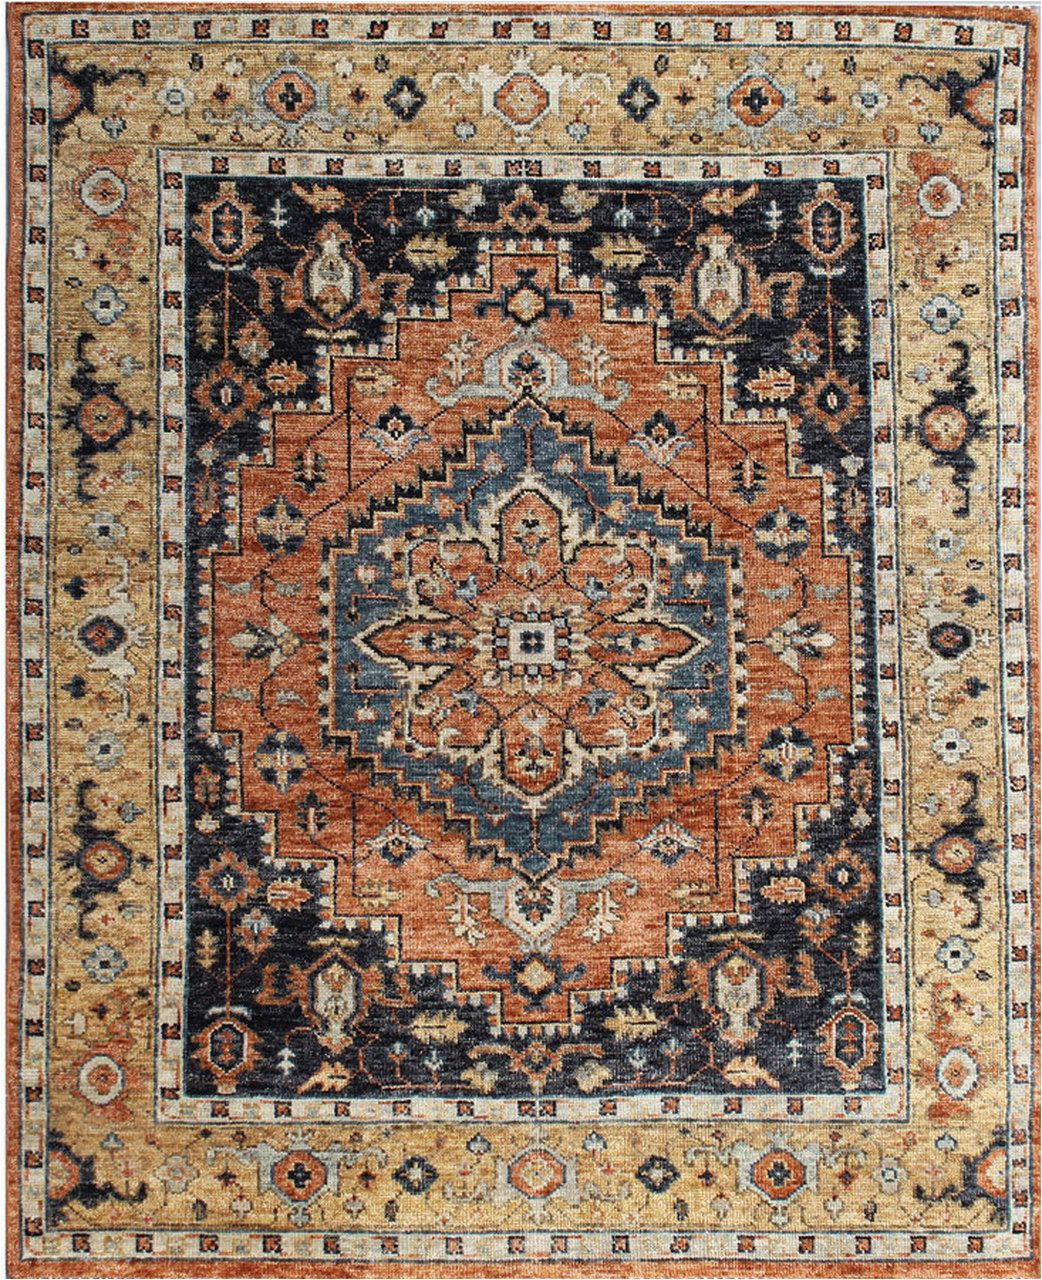 Rust Colored 8×10 area Rug 8 X 10 Transitional Rust orange Black and Beige Color